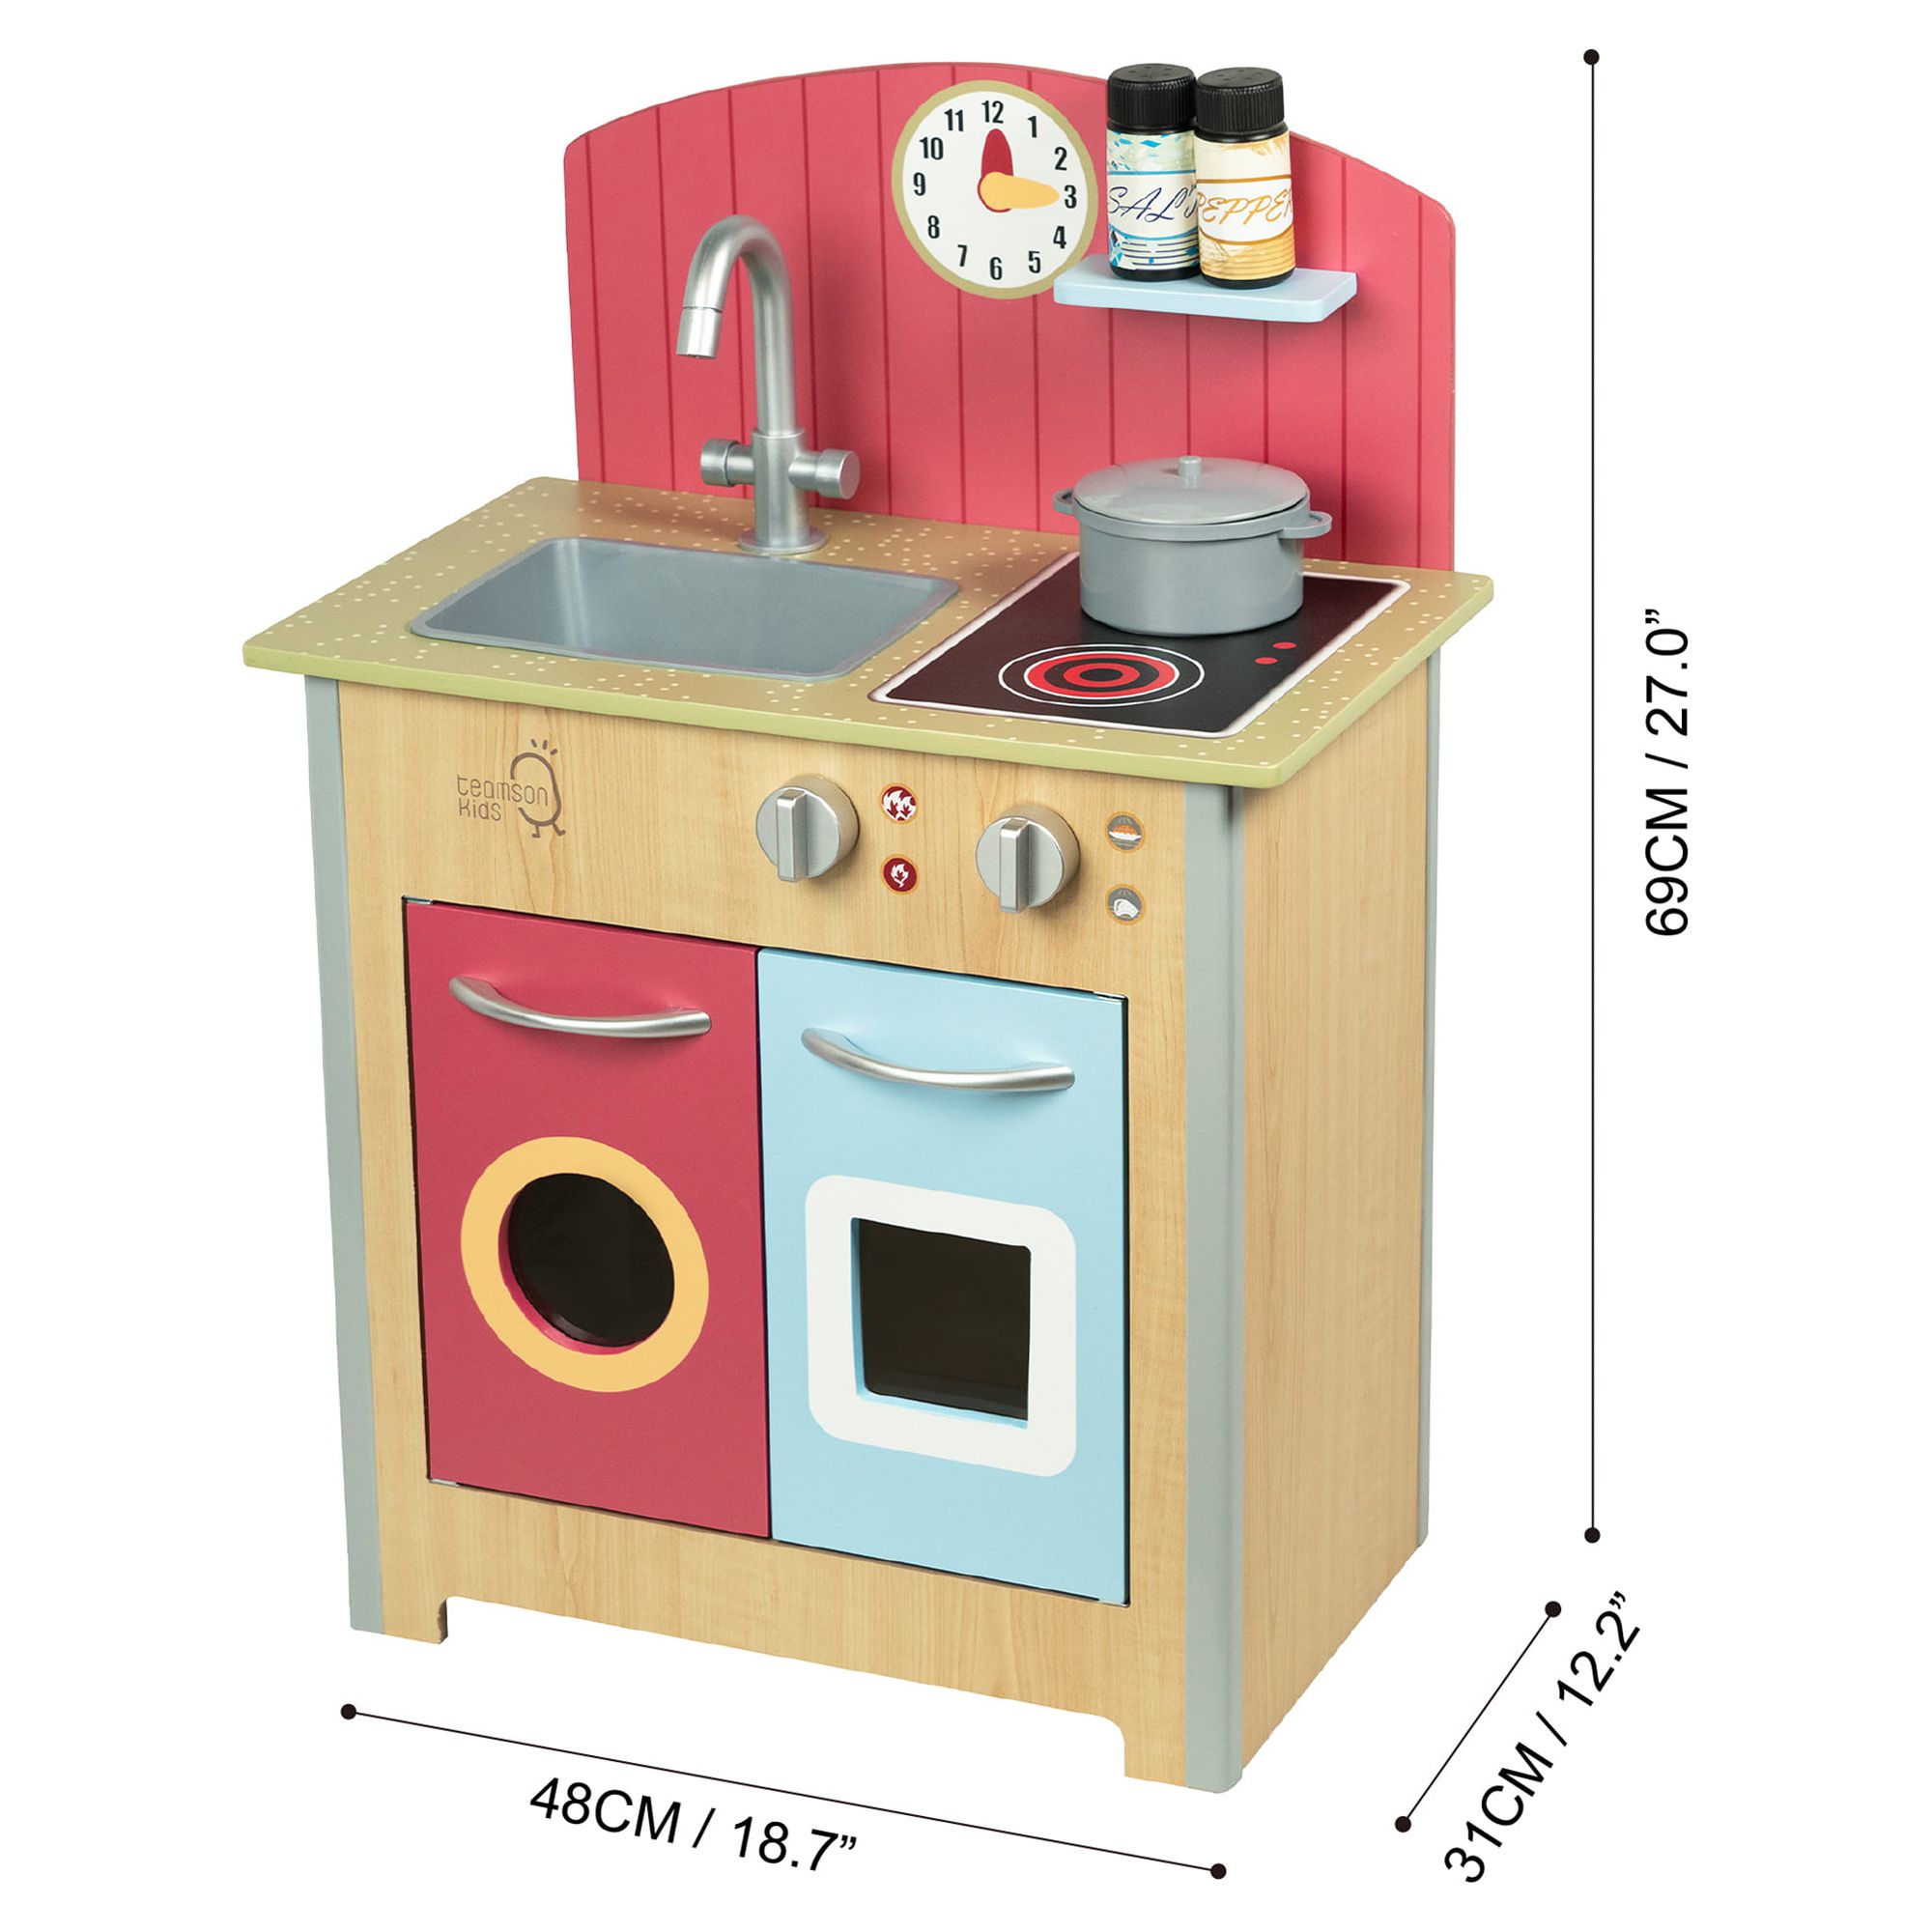 Teamson Kids Little Chef Porto Classic Wooden Kitchen Playset, Natural/Red - image 5 of 11